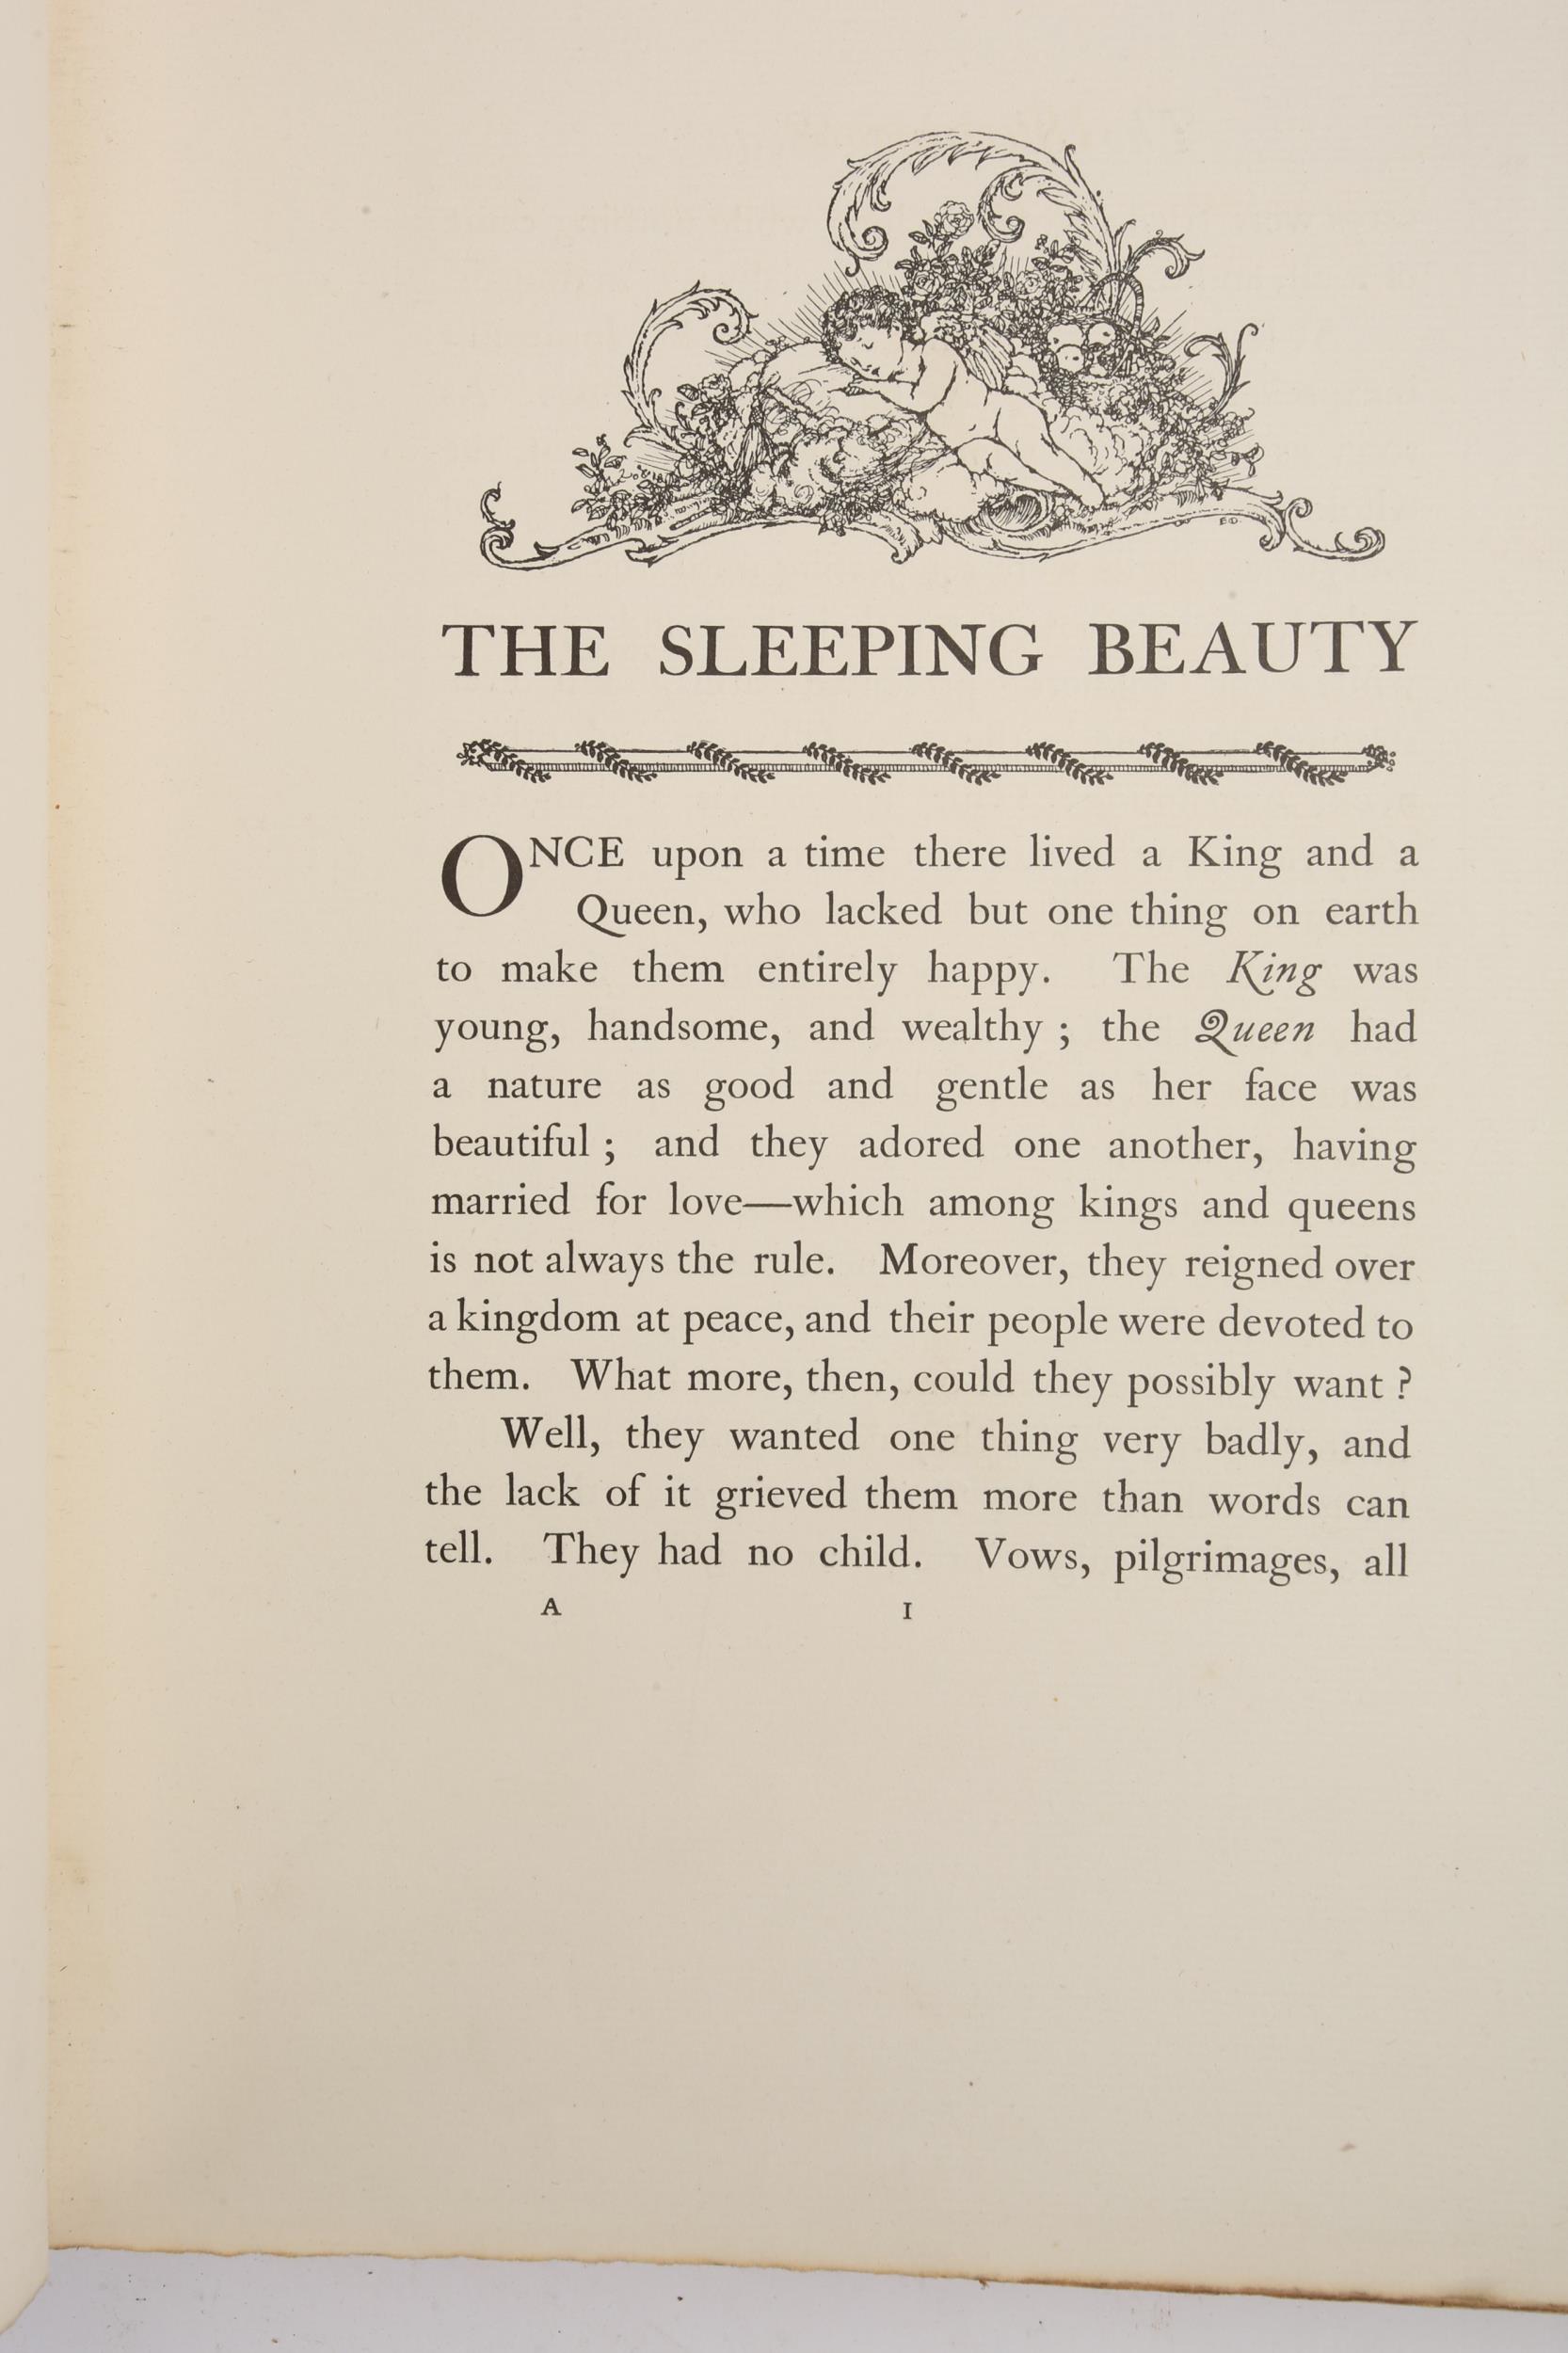 Arthur Quiller-Couch, 'The Sleeping Beauty and Other Fairy Tales', London, Hodder & Stoughton, - Image 16 of 21